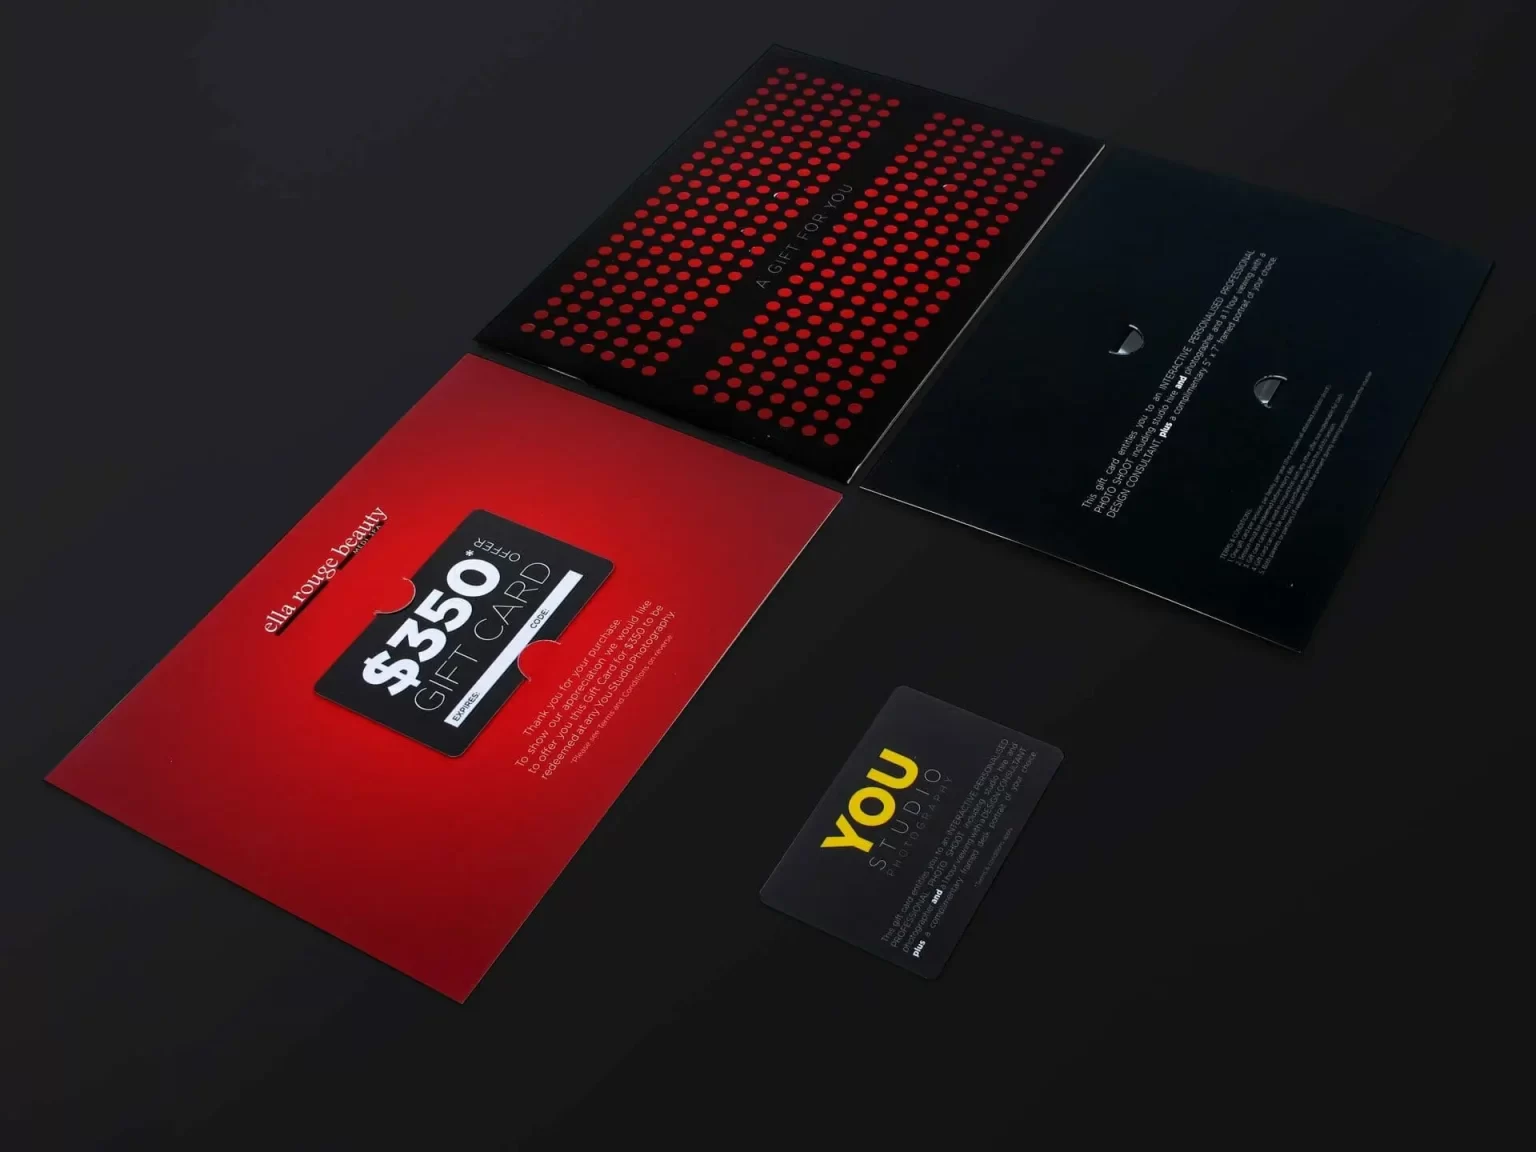 A $350 gift card and accompanying materials are laid out on a surface. The gift card is black, and the packaging is red and black with printed text.